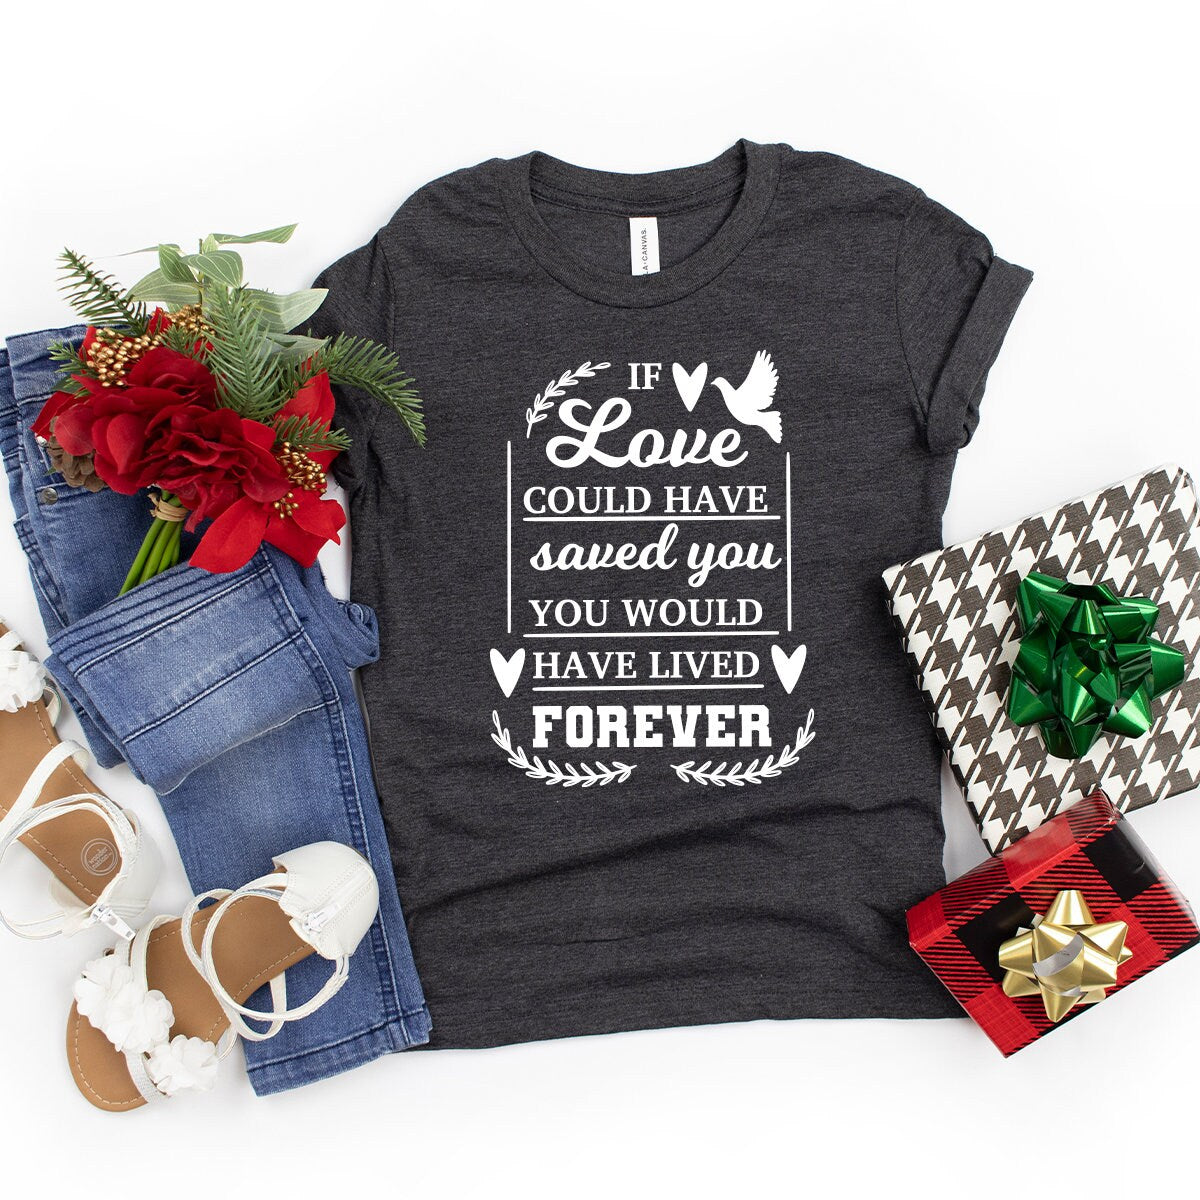 Memorial Shirt, If Love Could Have Saved You, You Would Have Lived Forever Shirt, Remembrance Shirt, Bereavement Shirt, RIP Shirt - Fastdeliverytees.com